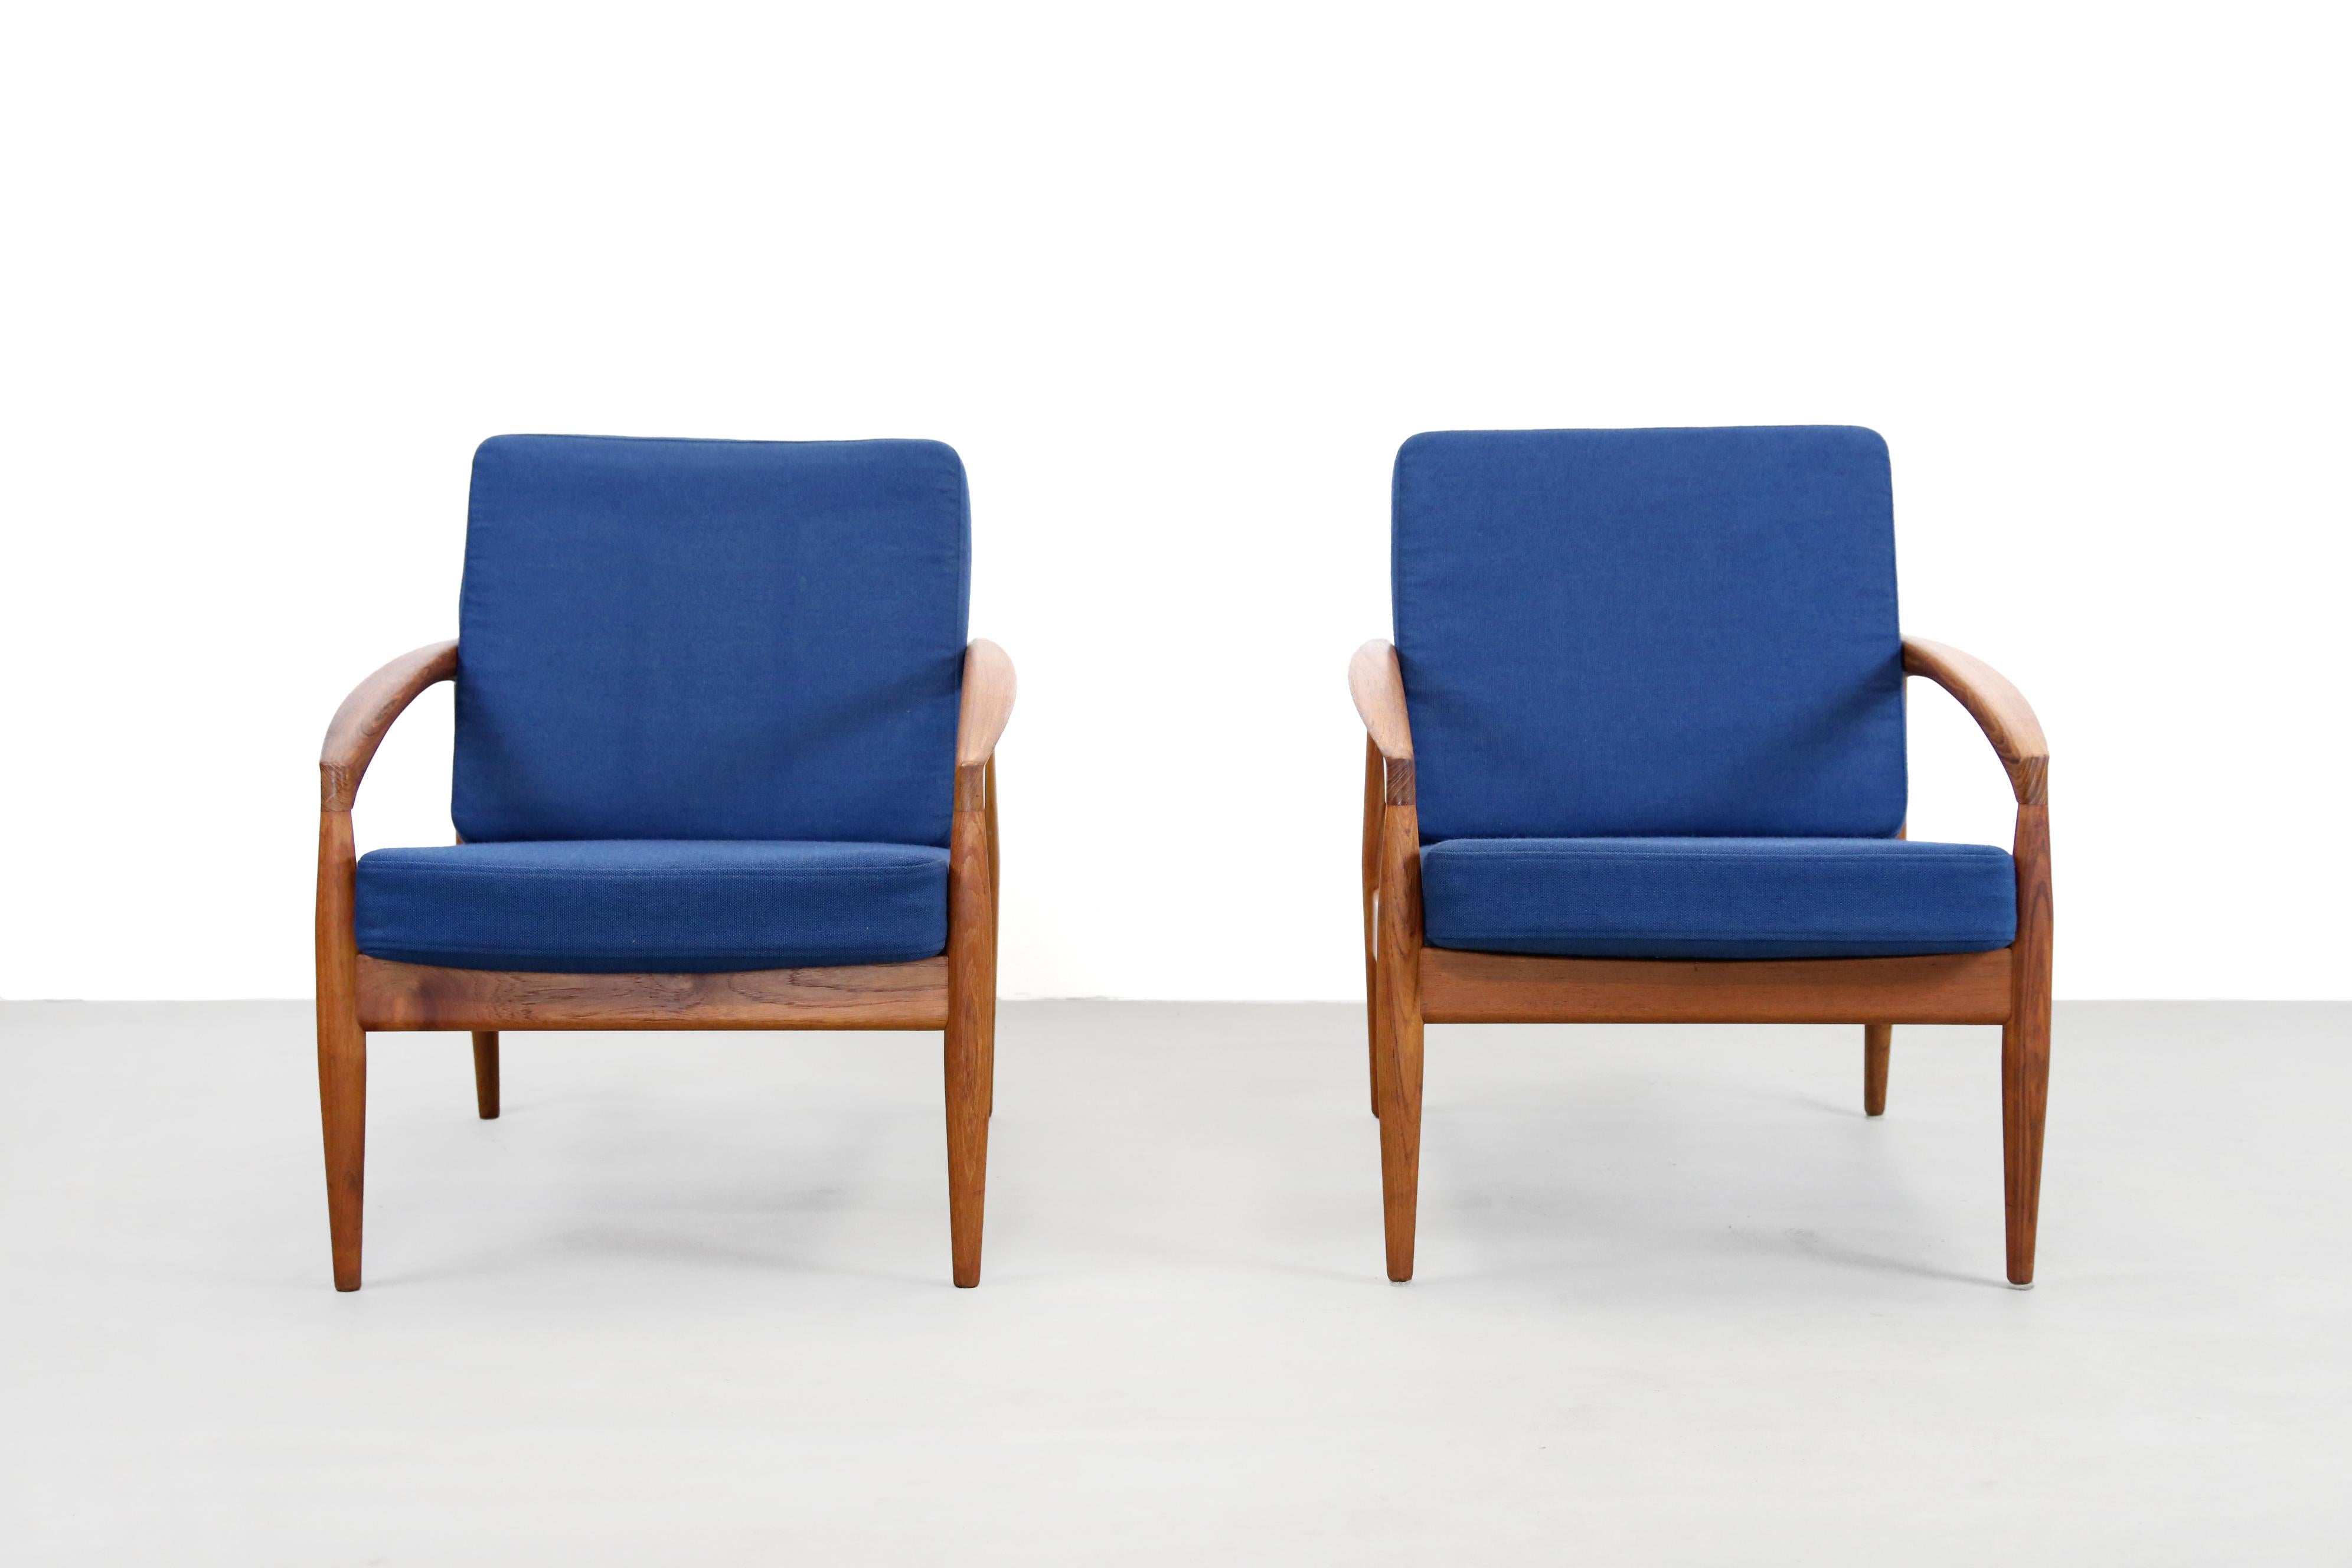 A beautiful set of two armchairs designed by Kai Kristiansen, produced by Magnus Olesen in Denmark. This model, 